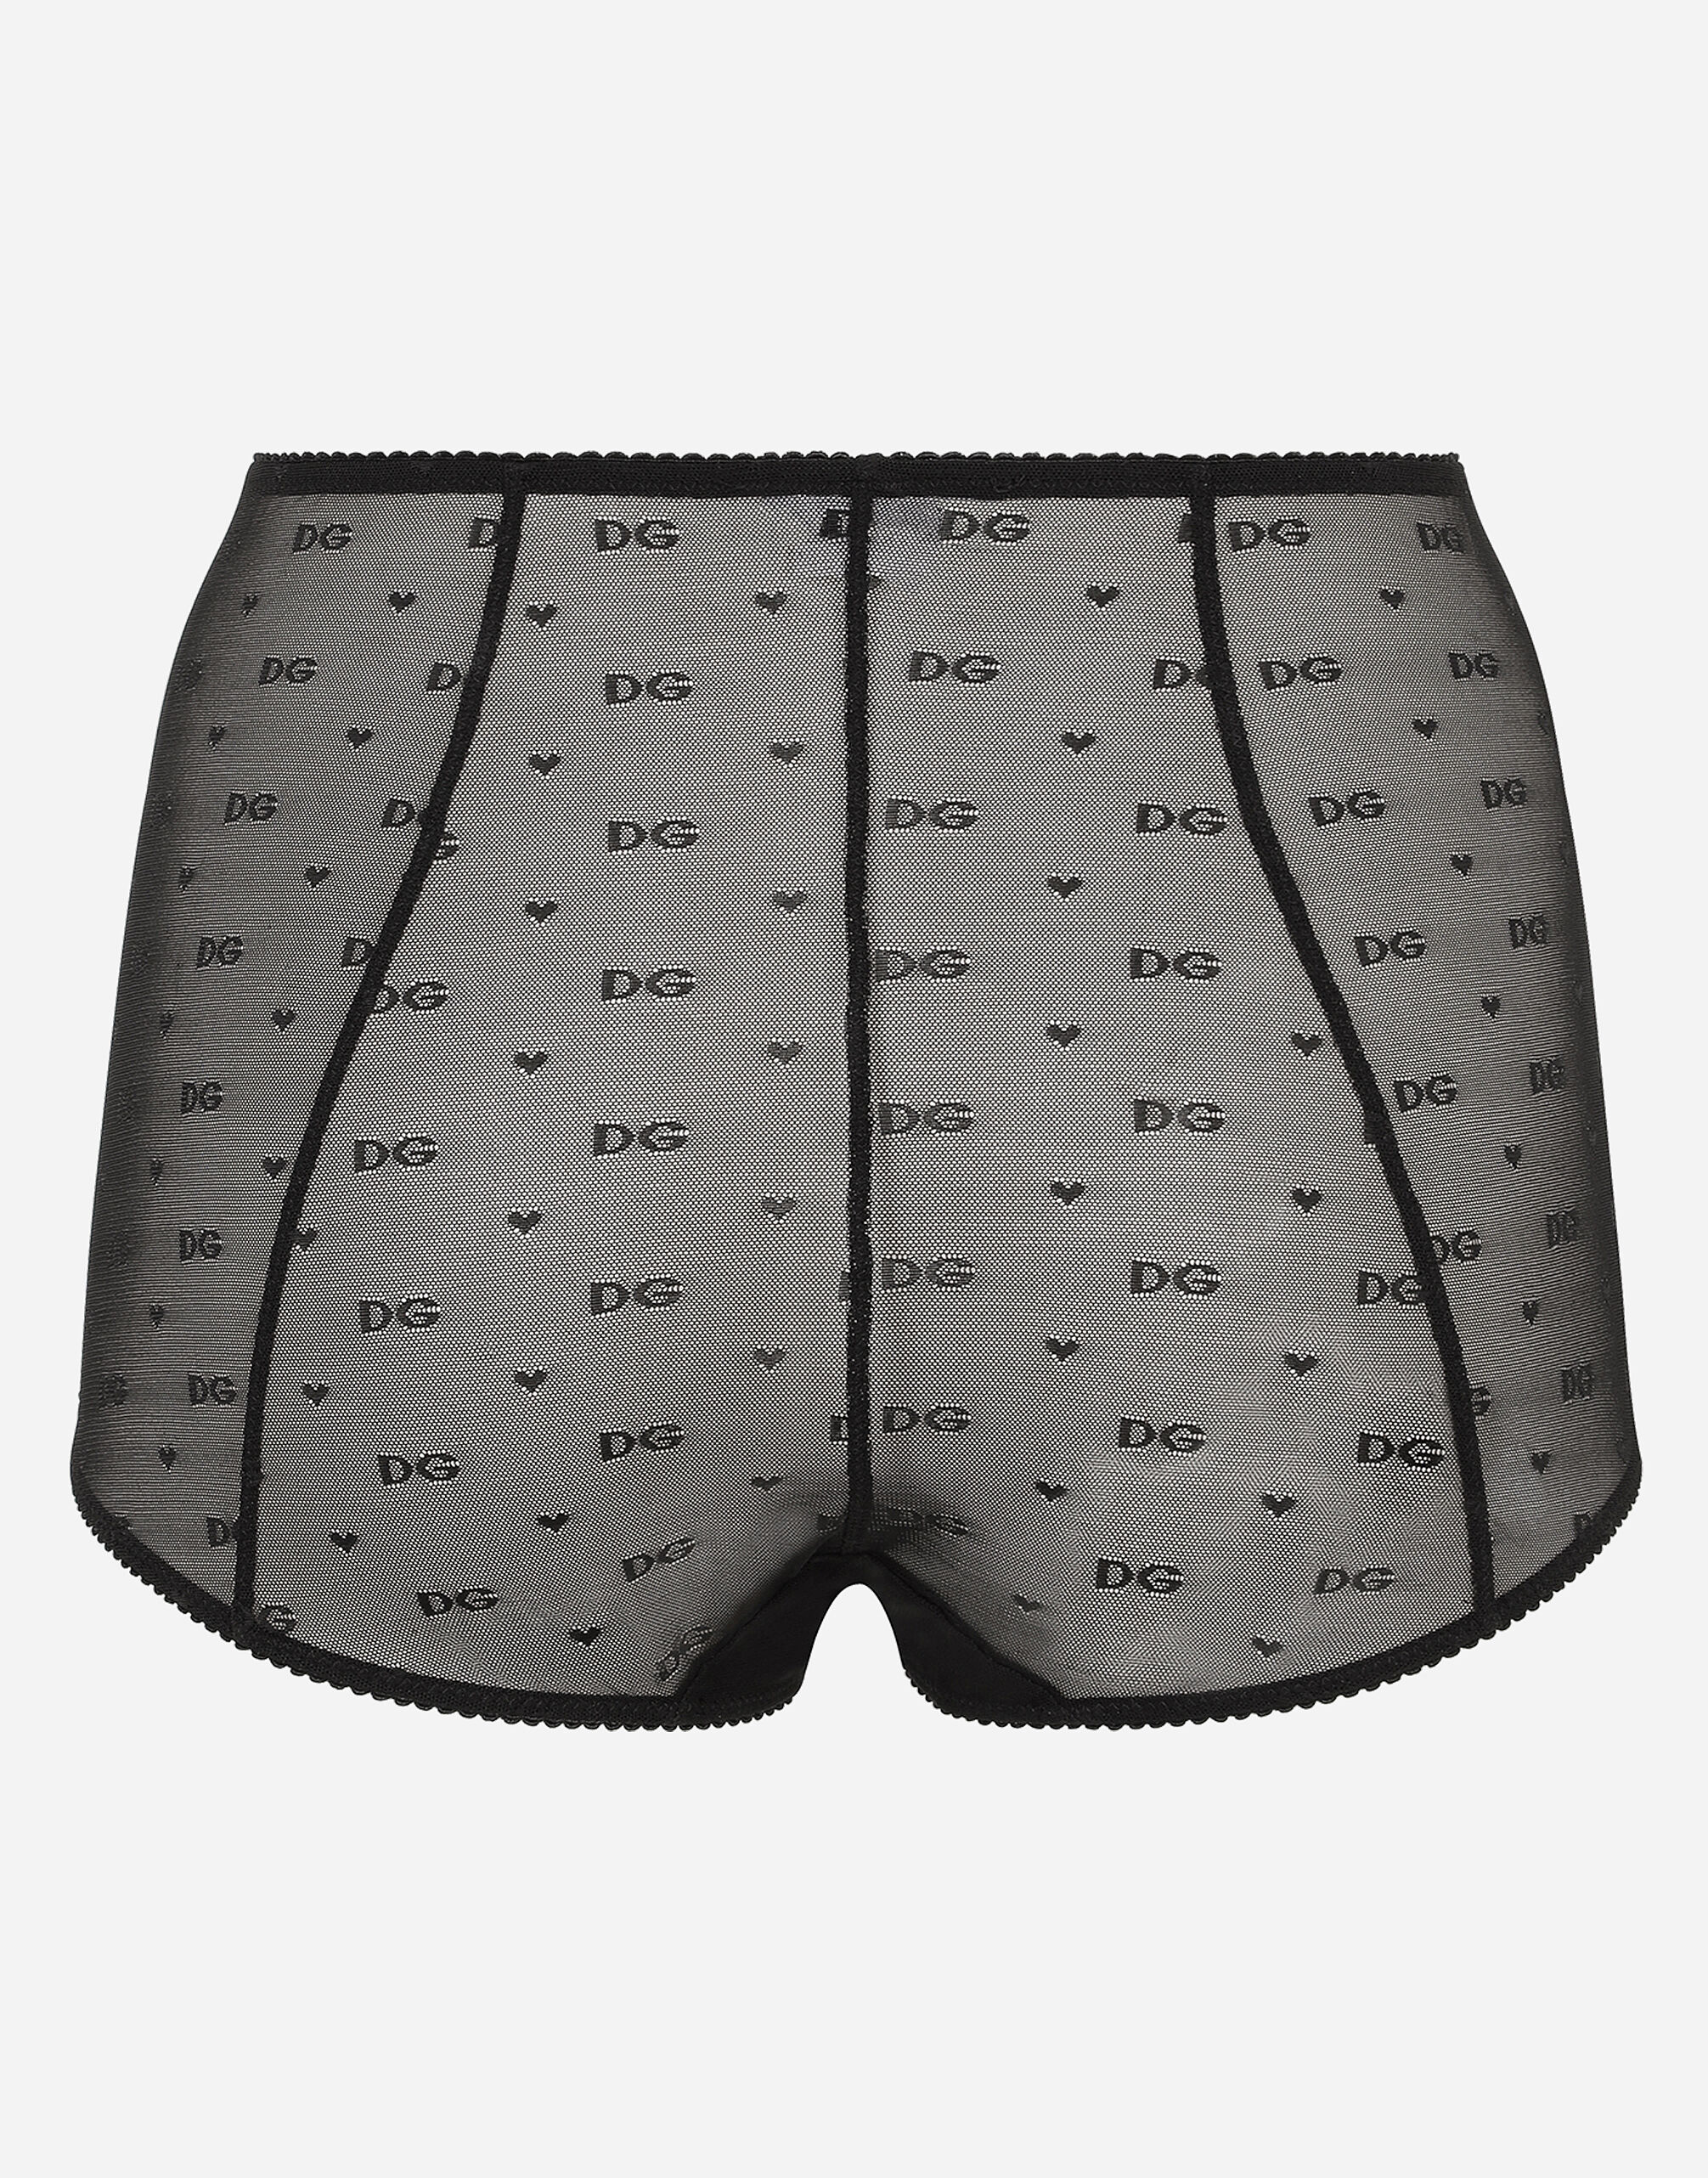 Jacquard tulle high-waisted panties in Black for | Dolce&Gabbana® US